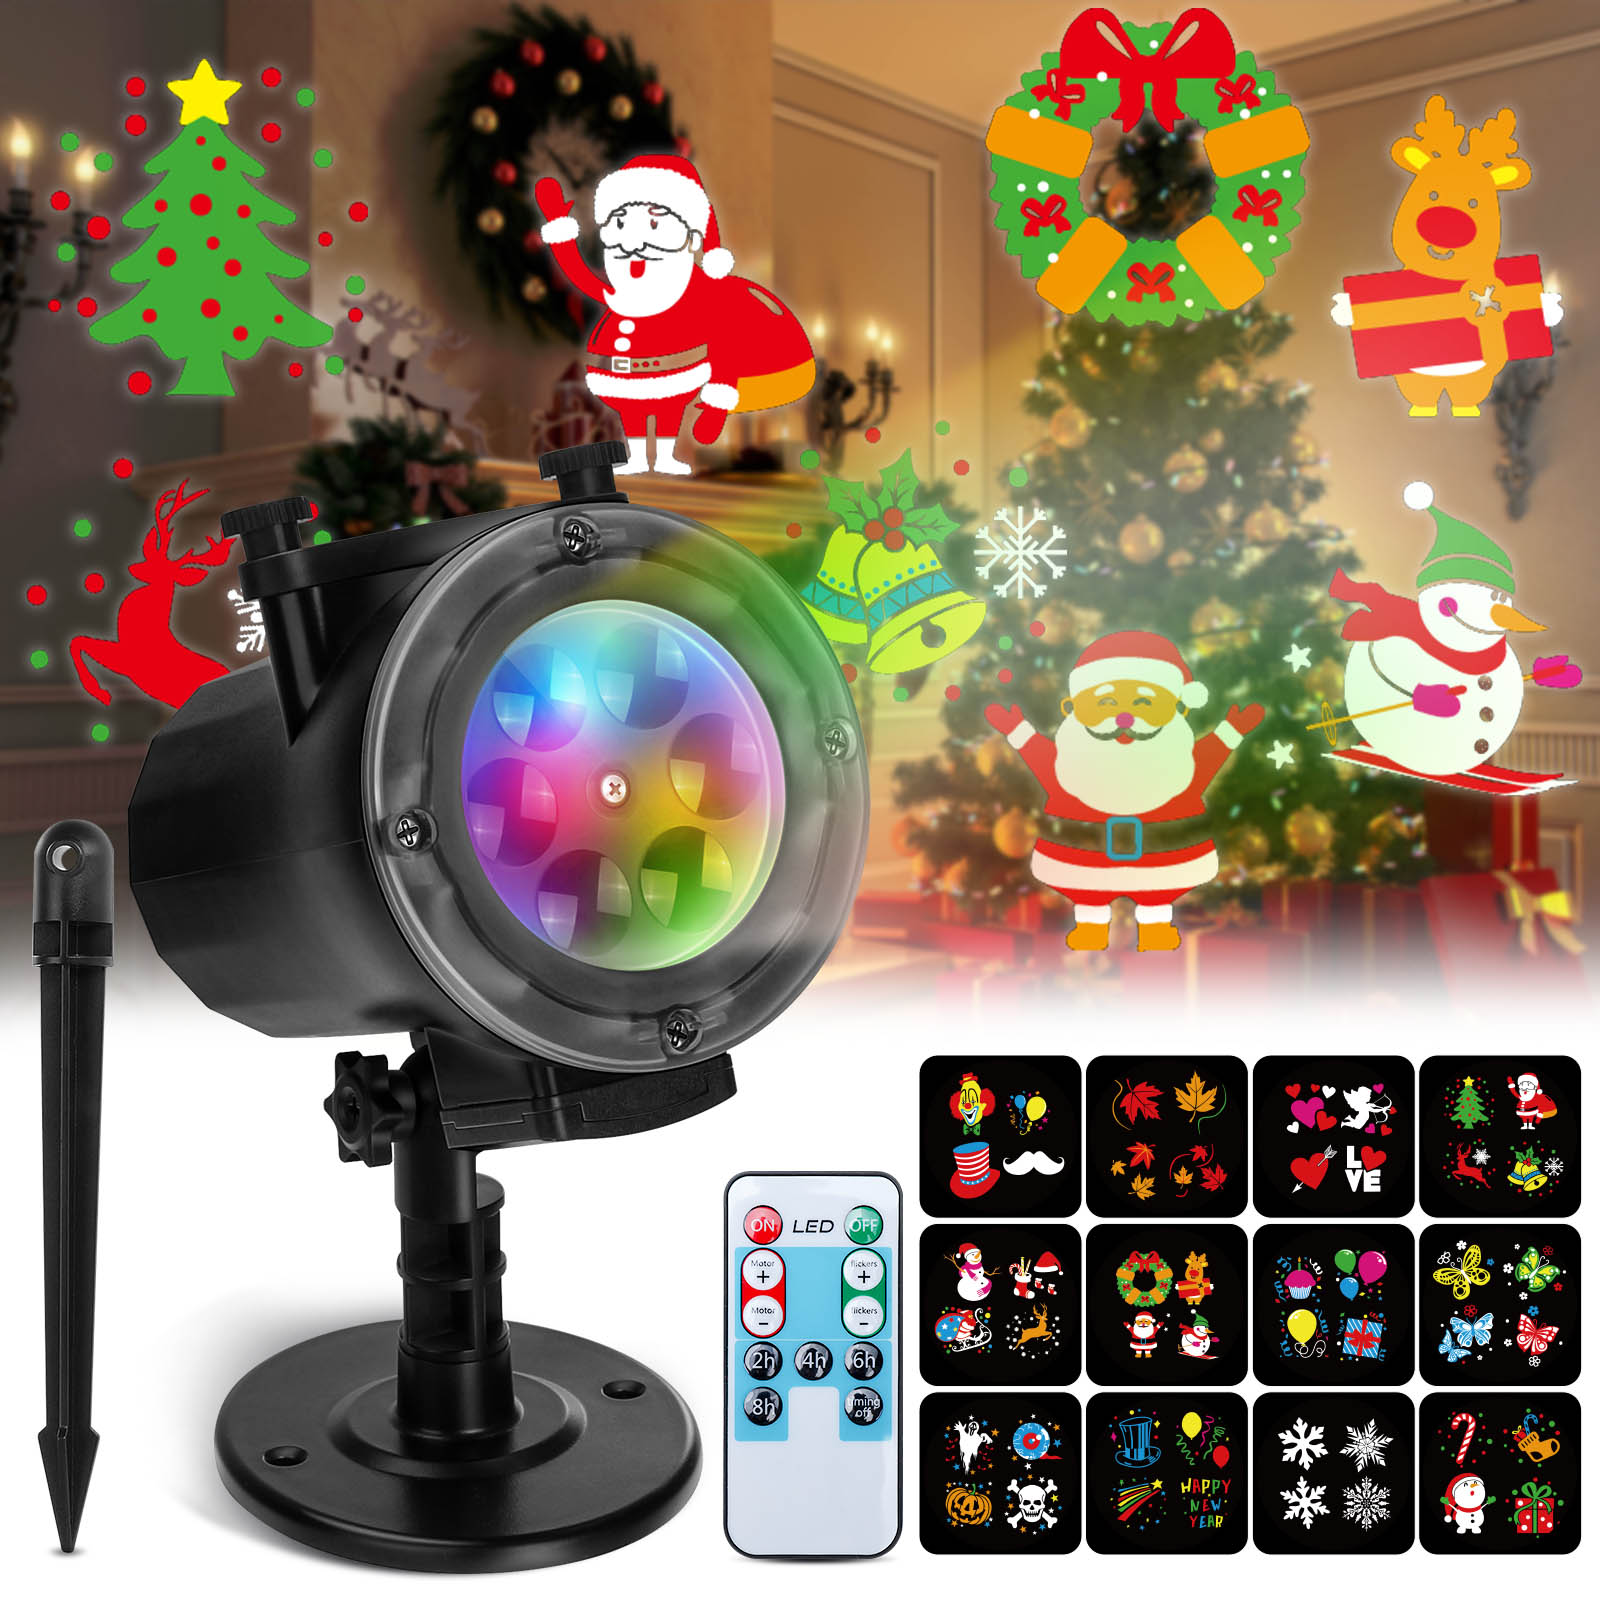 Christmas-Projector-Lights-Elfeland-Thanksgiving-Projector-Light-with-12-Ocean-Wave-Patterns-Christm-1784743-2